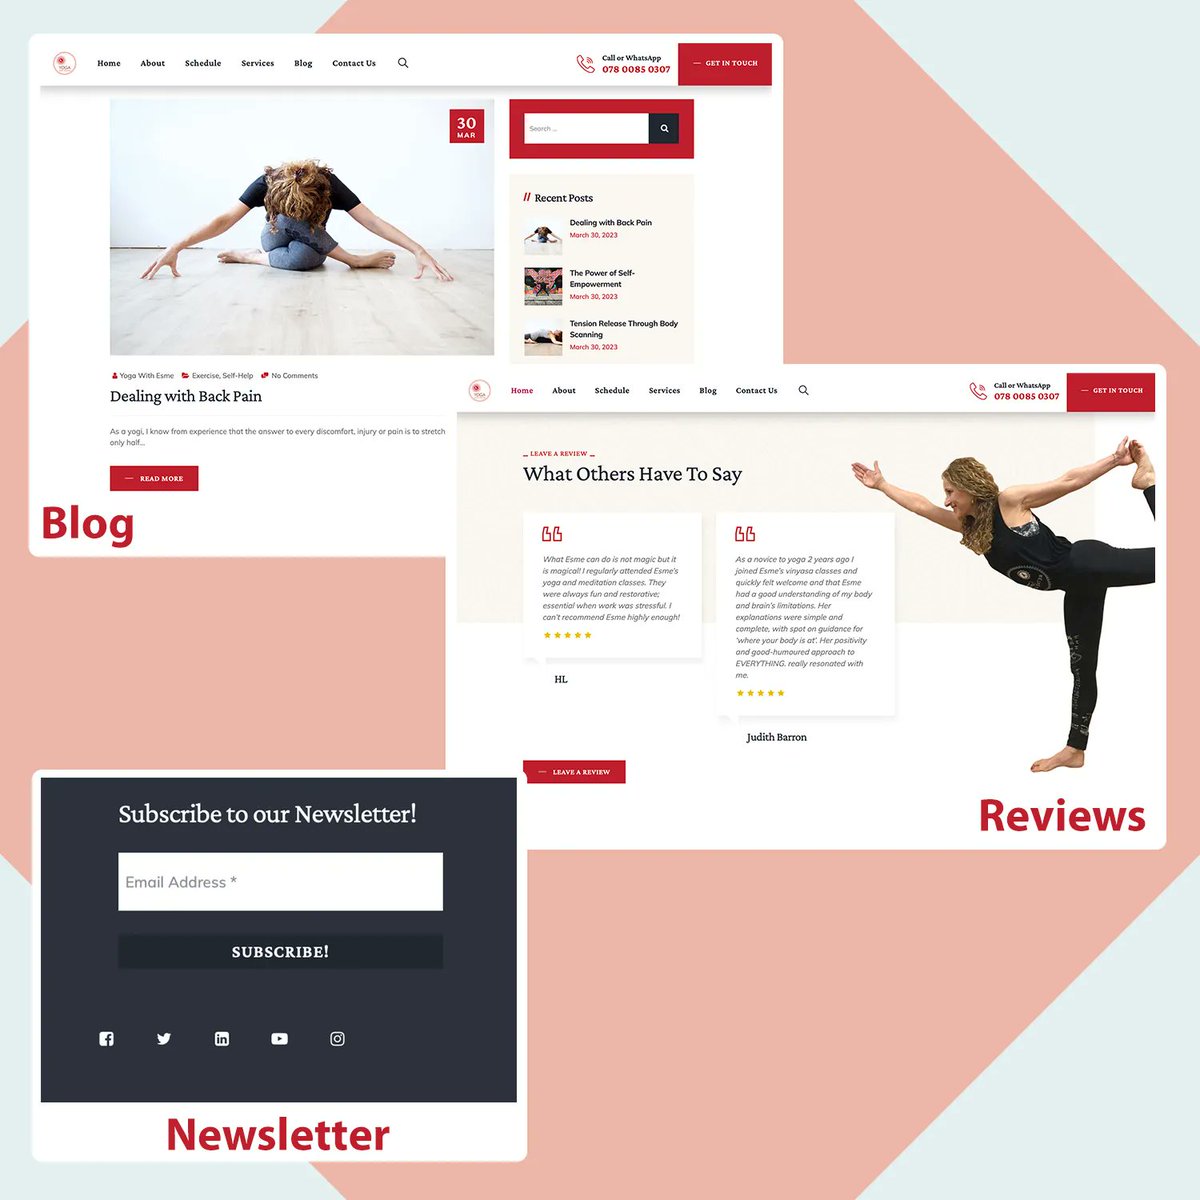 GUESS WHO’S GOT A NEW WEBSITE! 

#NewWebsite #Schedule #Services #YogaEvents #YogaTrainings #AlternativeTherapies #Spanish #English #MentalHealthMatters #HelpYourself #Review #Newsletter #Yoga #Reiki